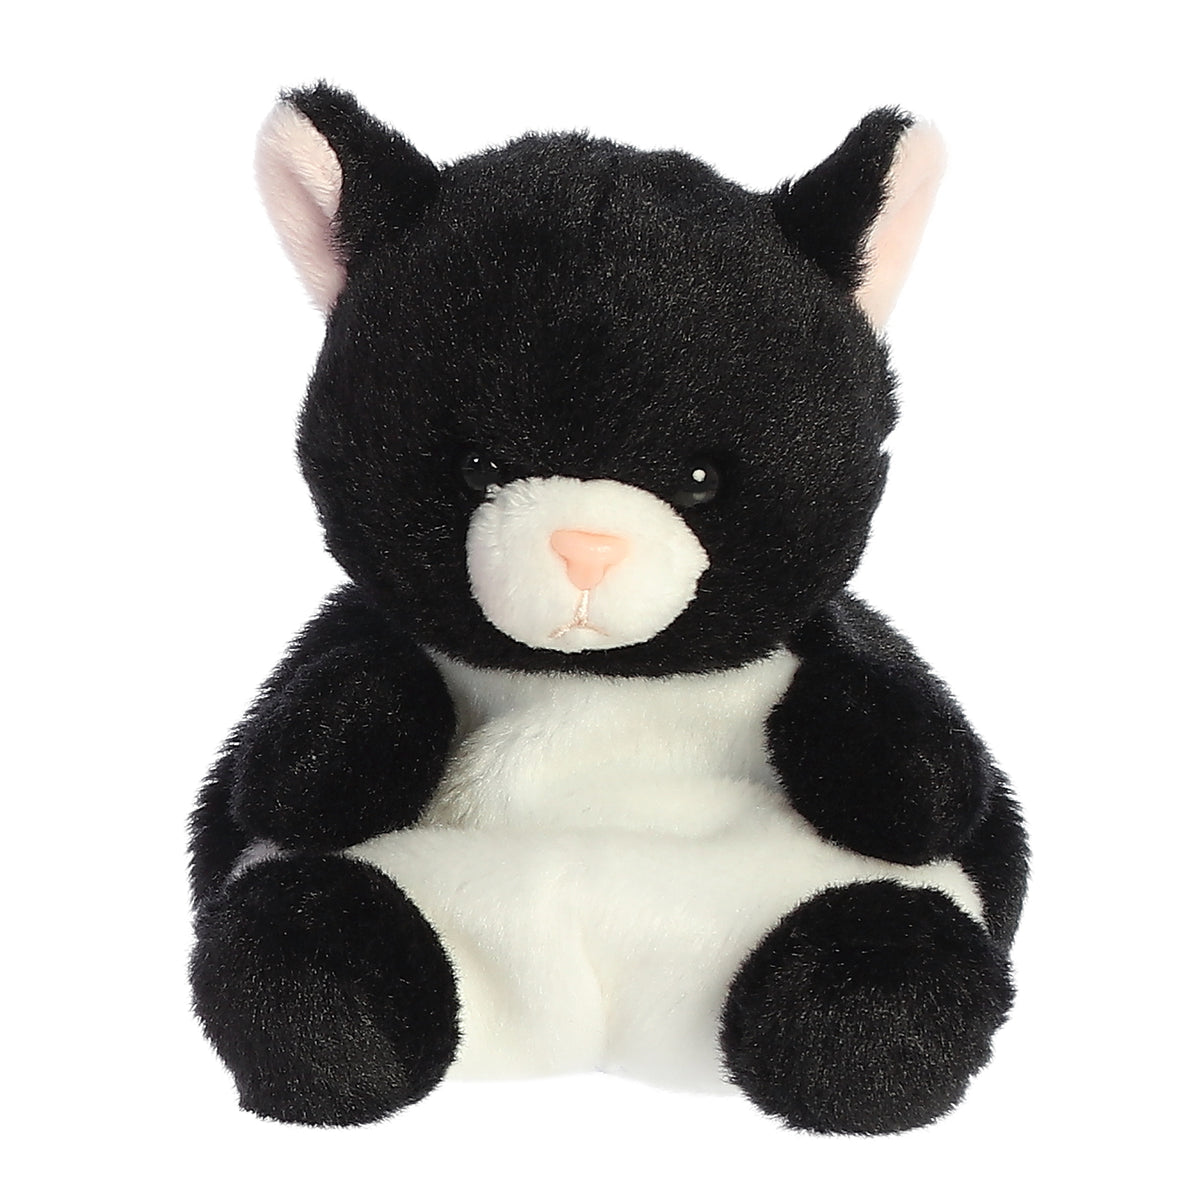 Cat plush from Palm Pals, flaunting a black and white coat with pink accents, poised for heartwarming cuddles and play.